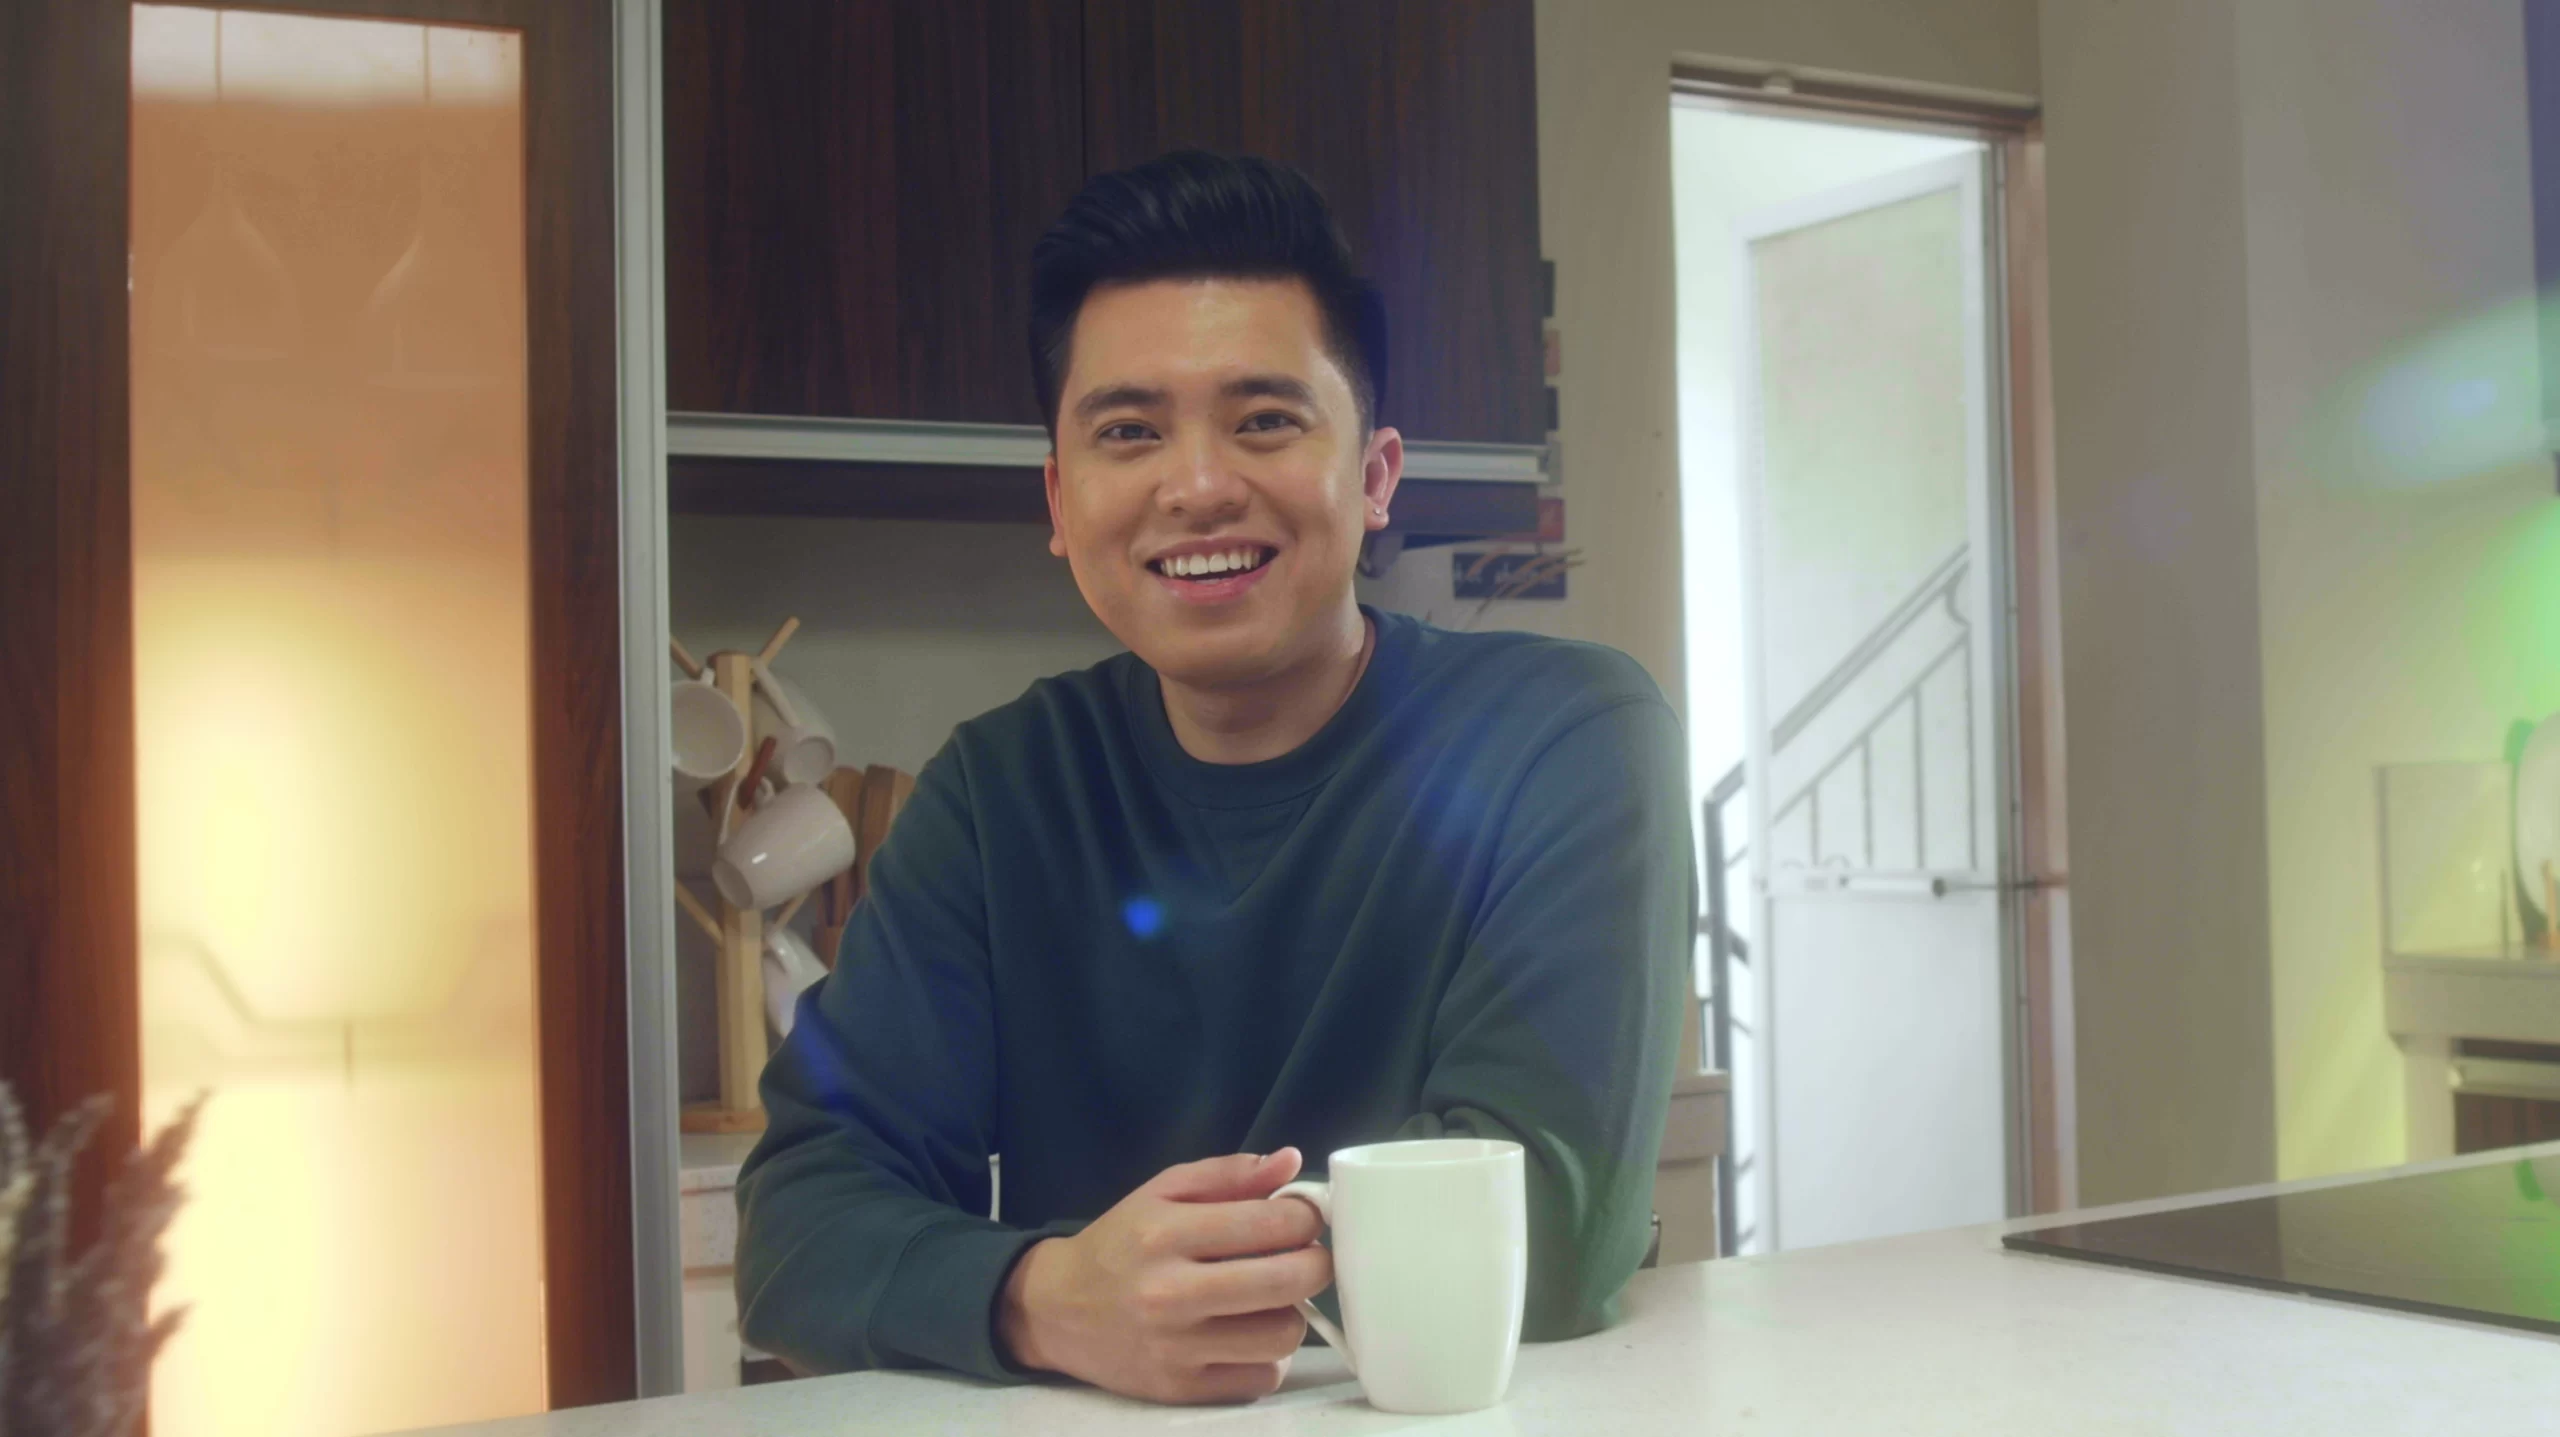 Subway has just announced its latest digital ad campaign featuring noted YouTube vlogger Kimpoy Feliciano.